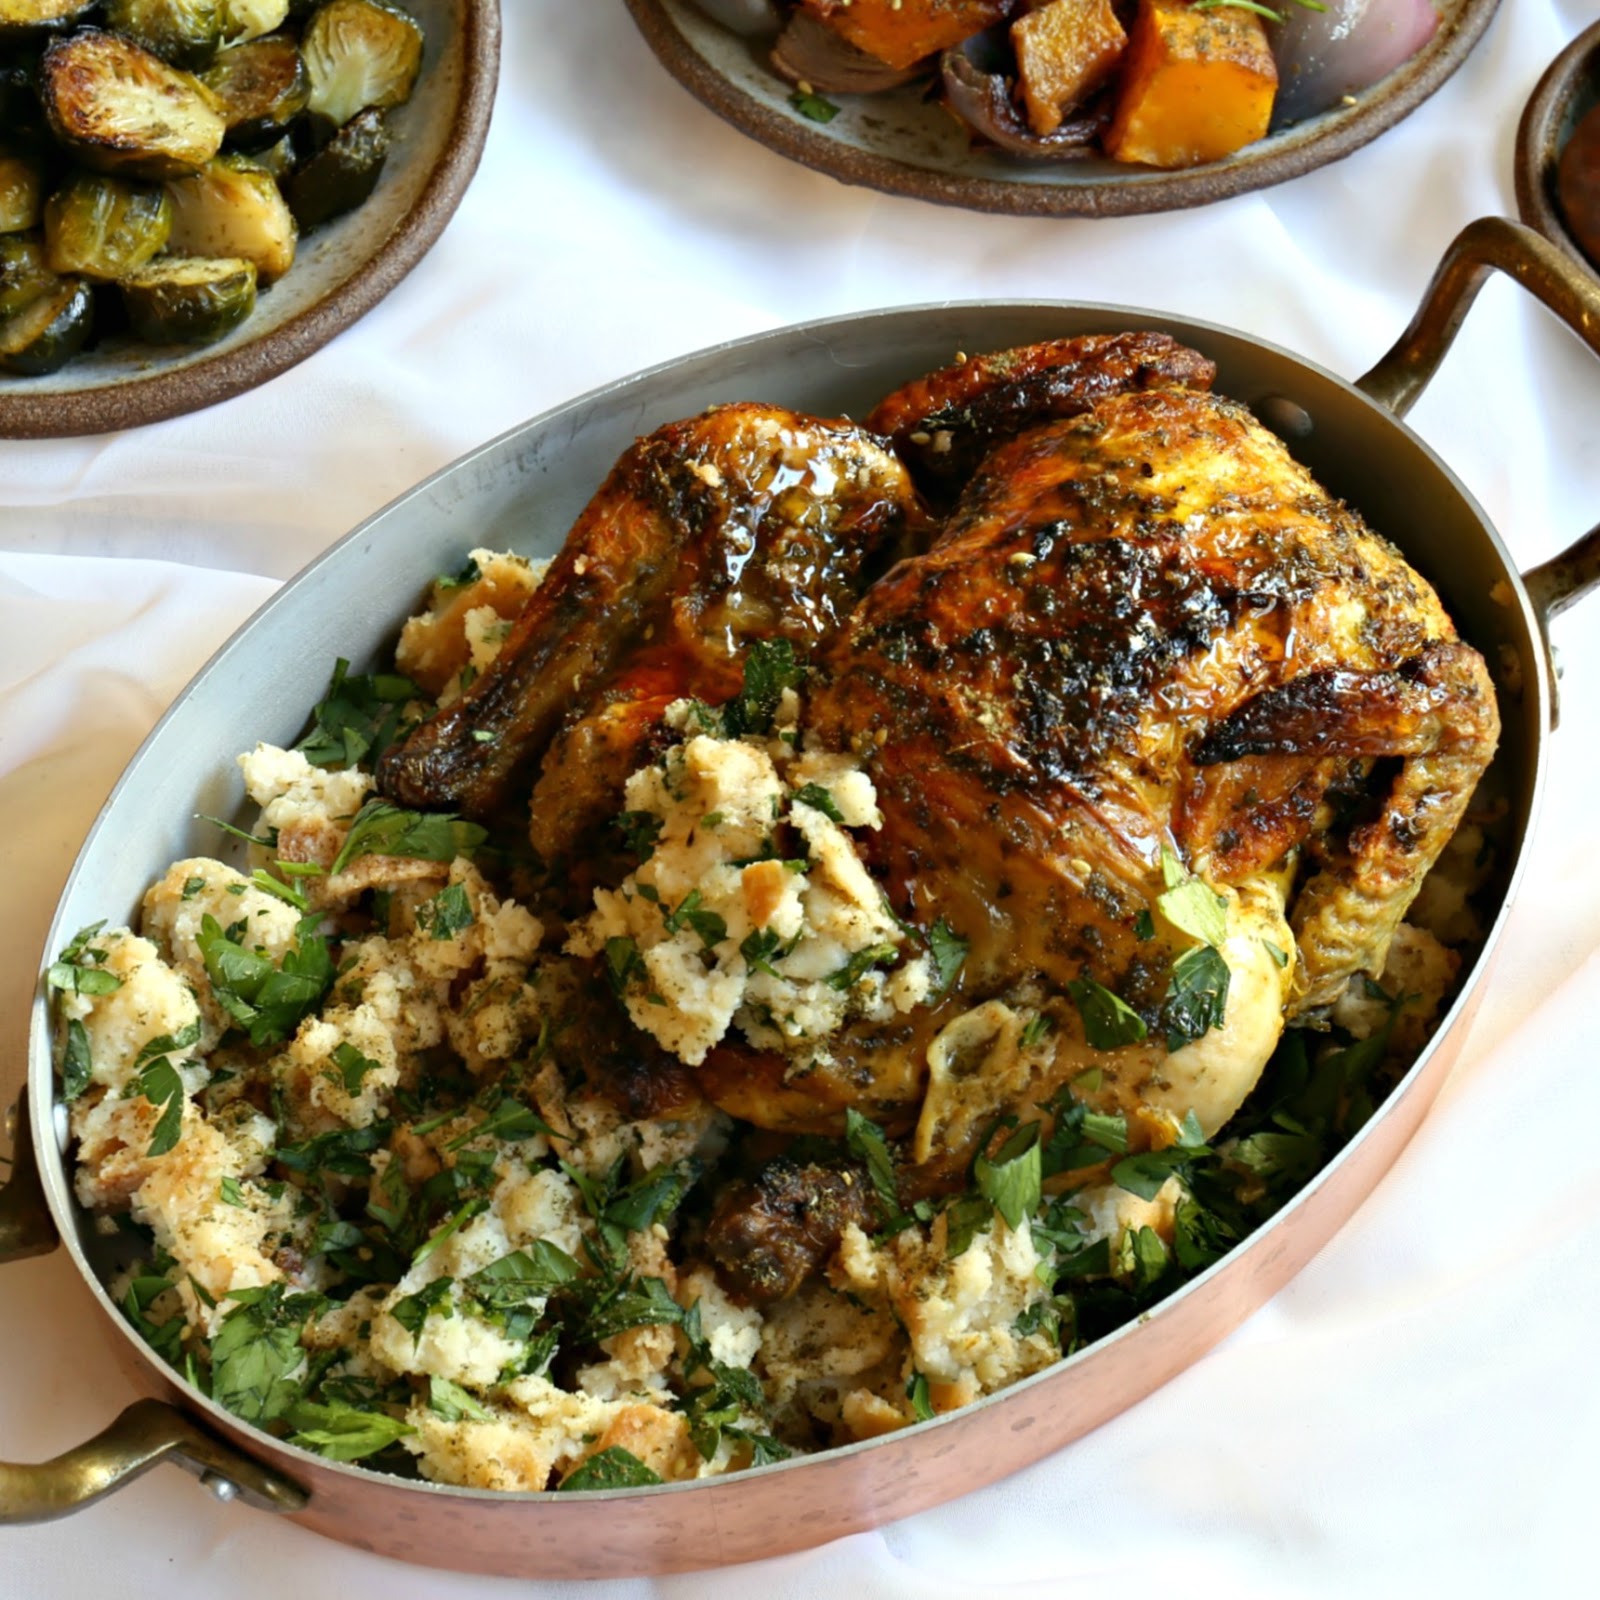 Roasted and stuffed Cornish game hen along with Middle Eastern spiced side dishes.